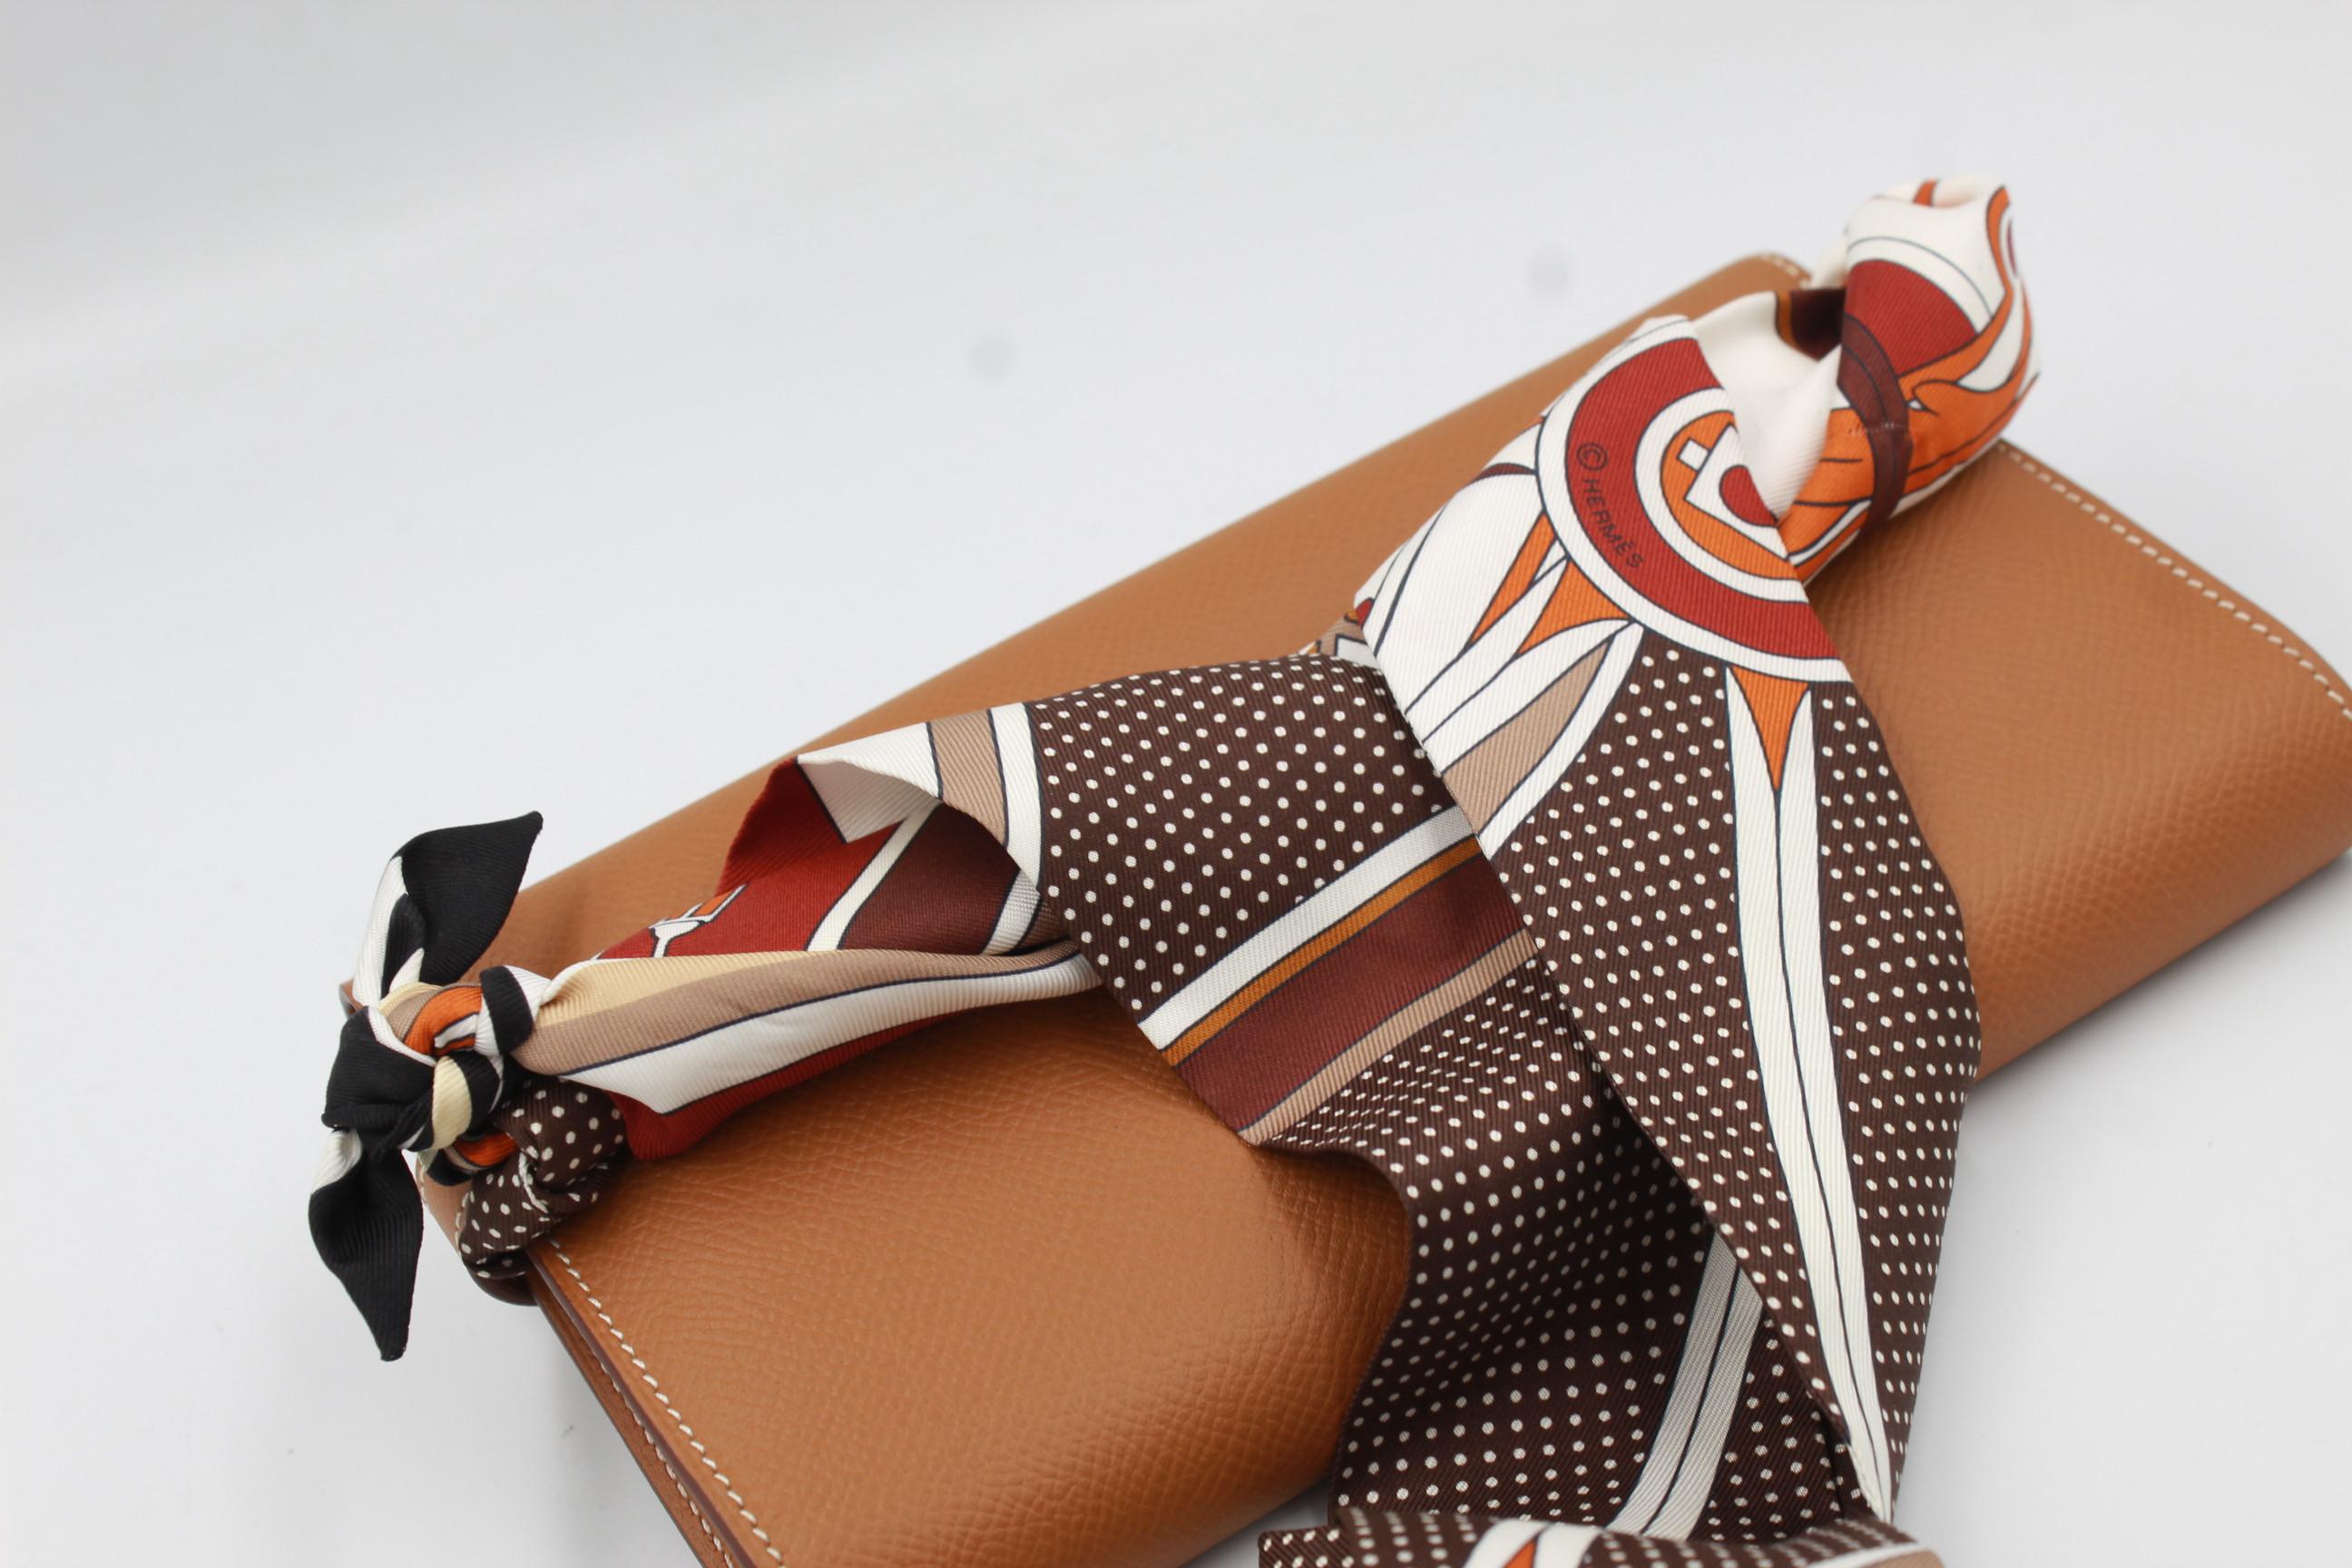 Hermès Kelly wallet in brown leather and its twilly
Very good condition.
11cm x 20cm x 2.5cm